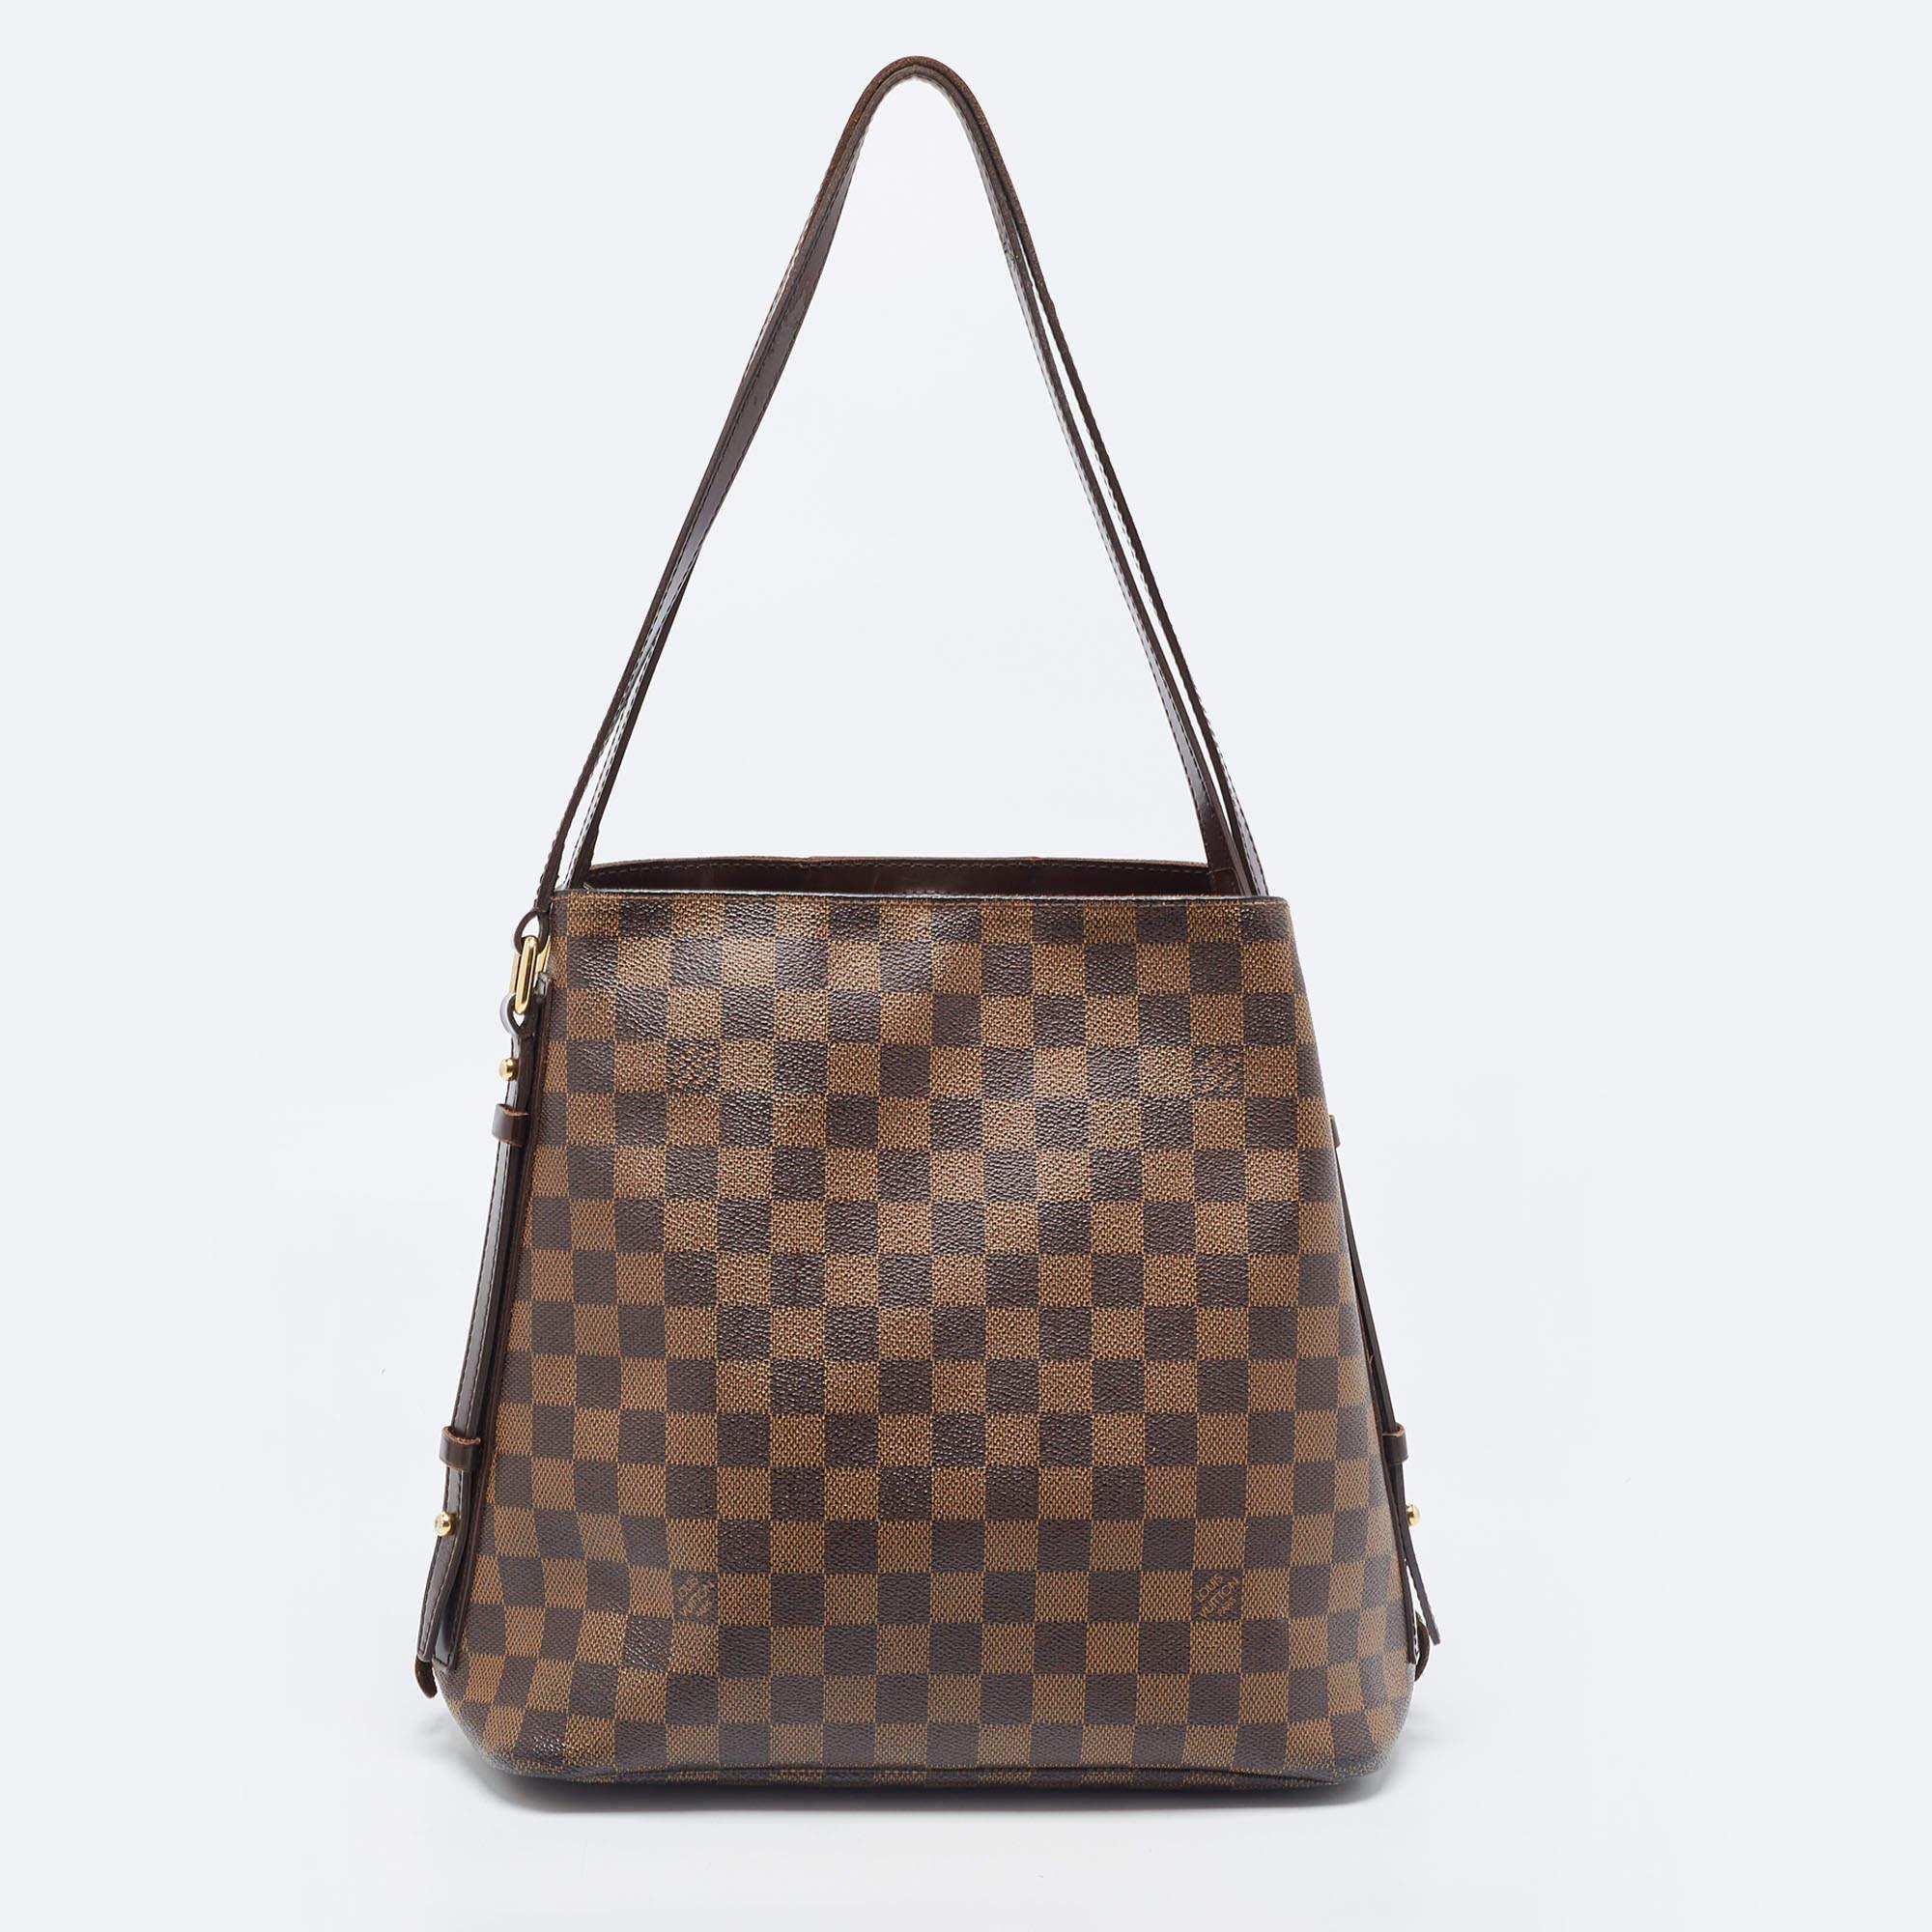 The finest bags come from Louis Vuitton's workhouse, for sure. Made from Damier Ebene canvas, this bag has leather trims, two leather handles, and zippers on the sides that can be unzipped to grant more space. Complete with a canvas interior, this